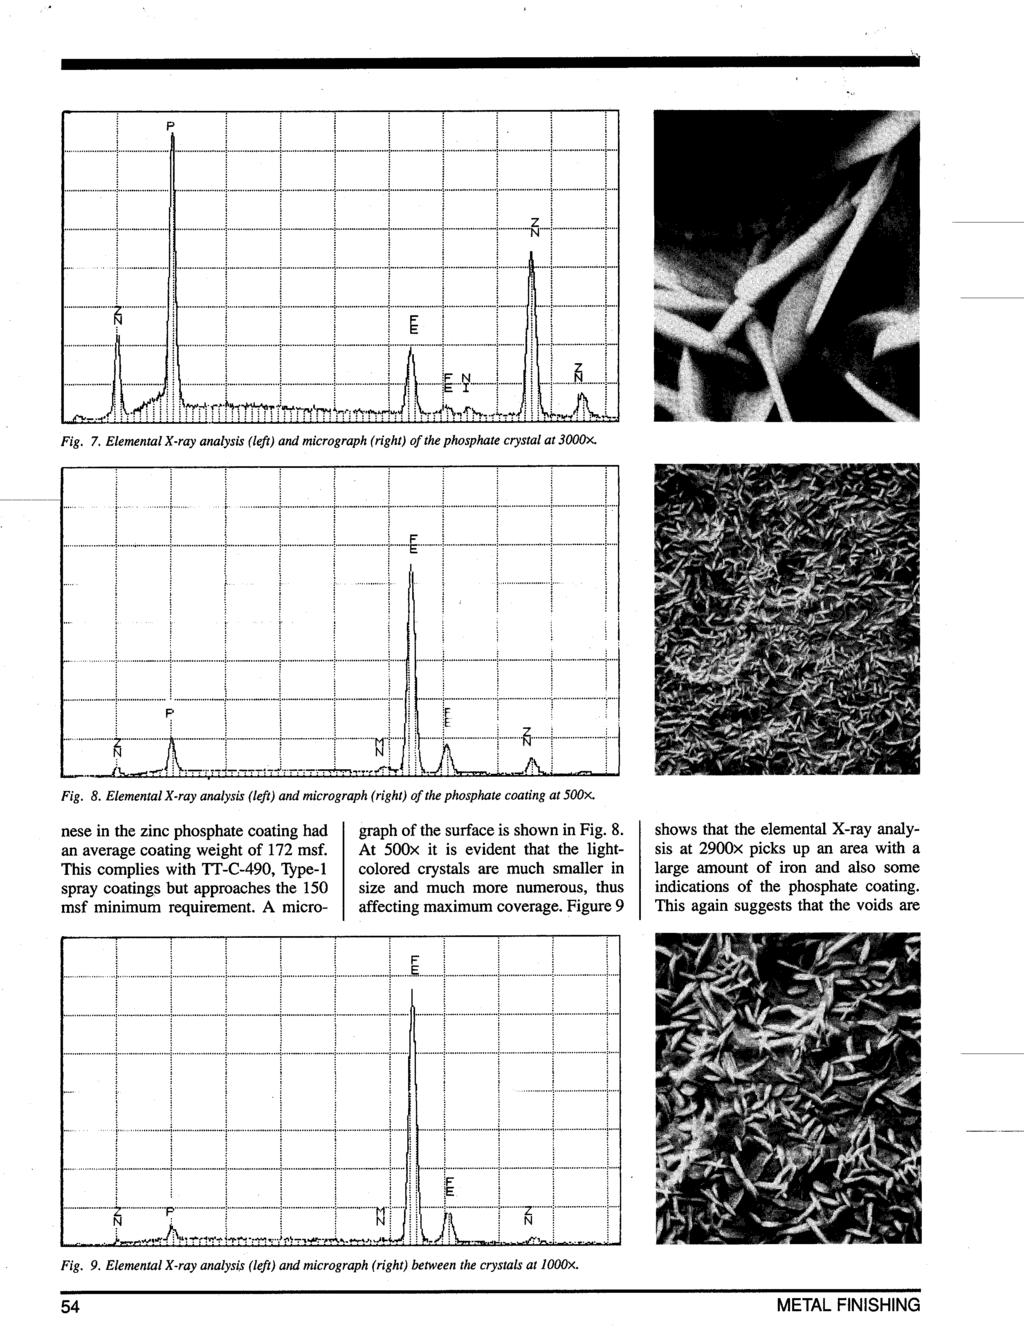 Fig. 7. Elemental X-ray analysis (lef) and micrograph (right) of the phosphate crystal at 3000~. nese in the zinc phosphate coating had an average coating weight of 172 msf.